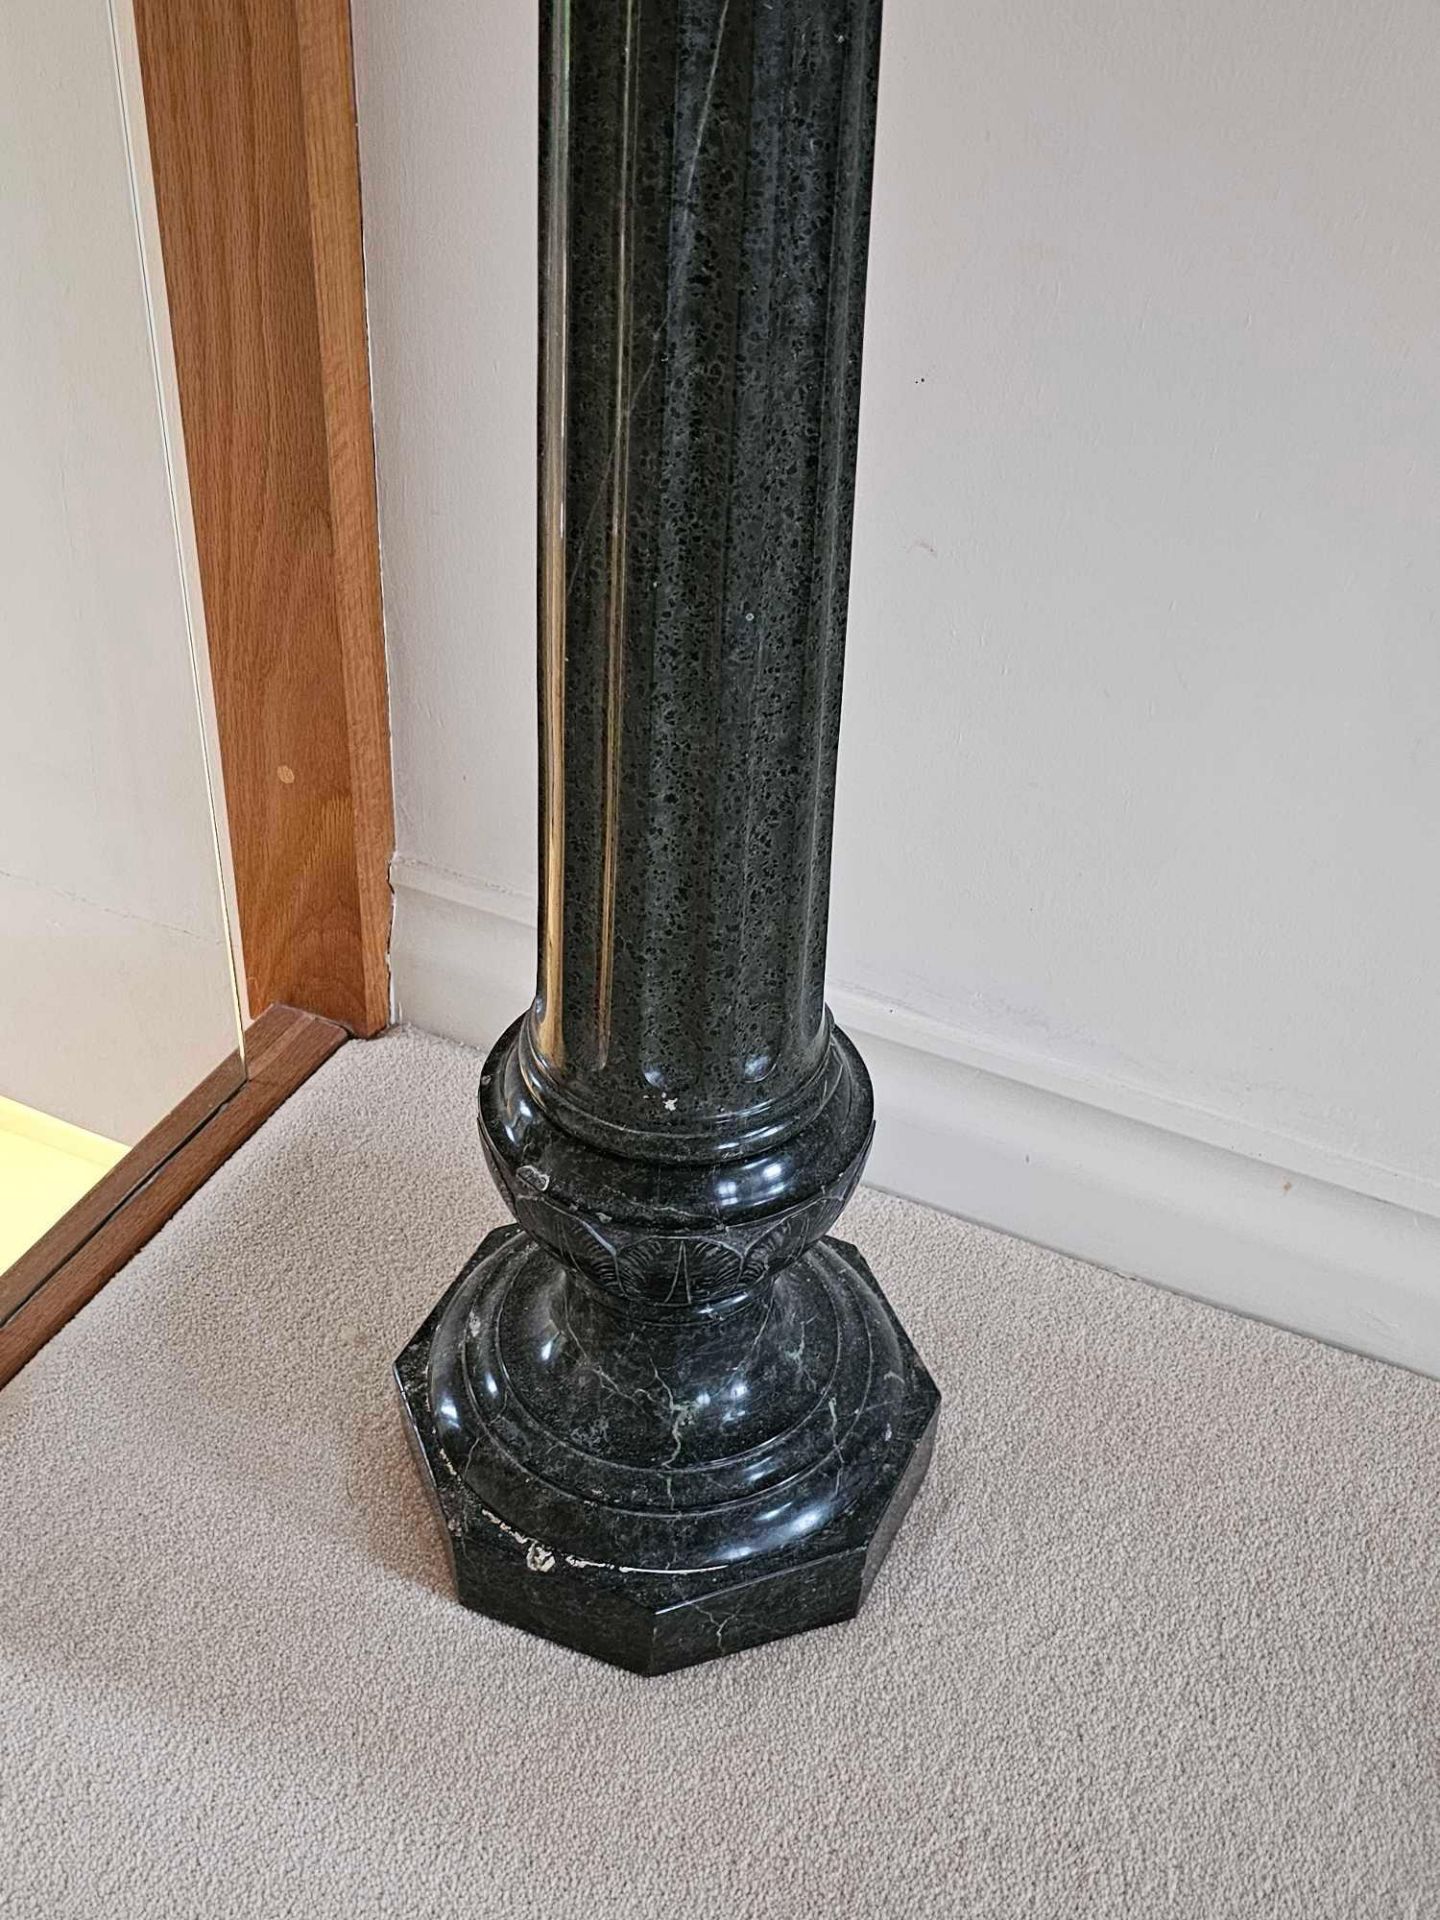 French Neoclassical Style Marble Pedestal Column The Circular Top On The Fluted Tapered Column And - Image 3 of 3